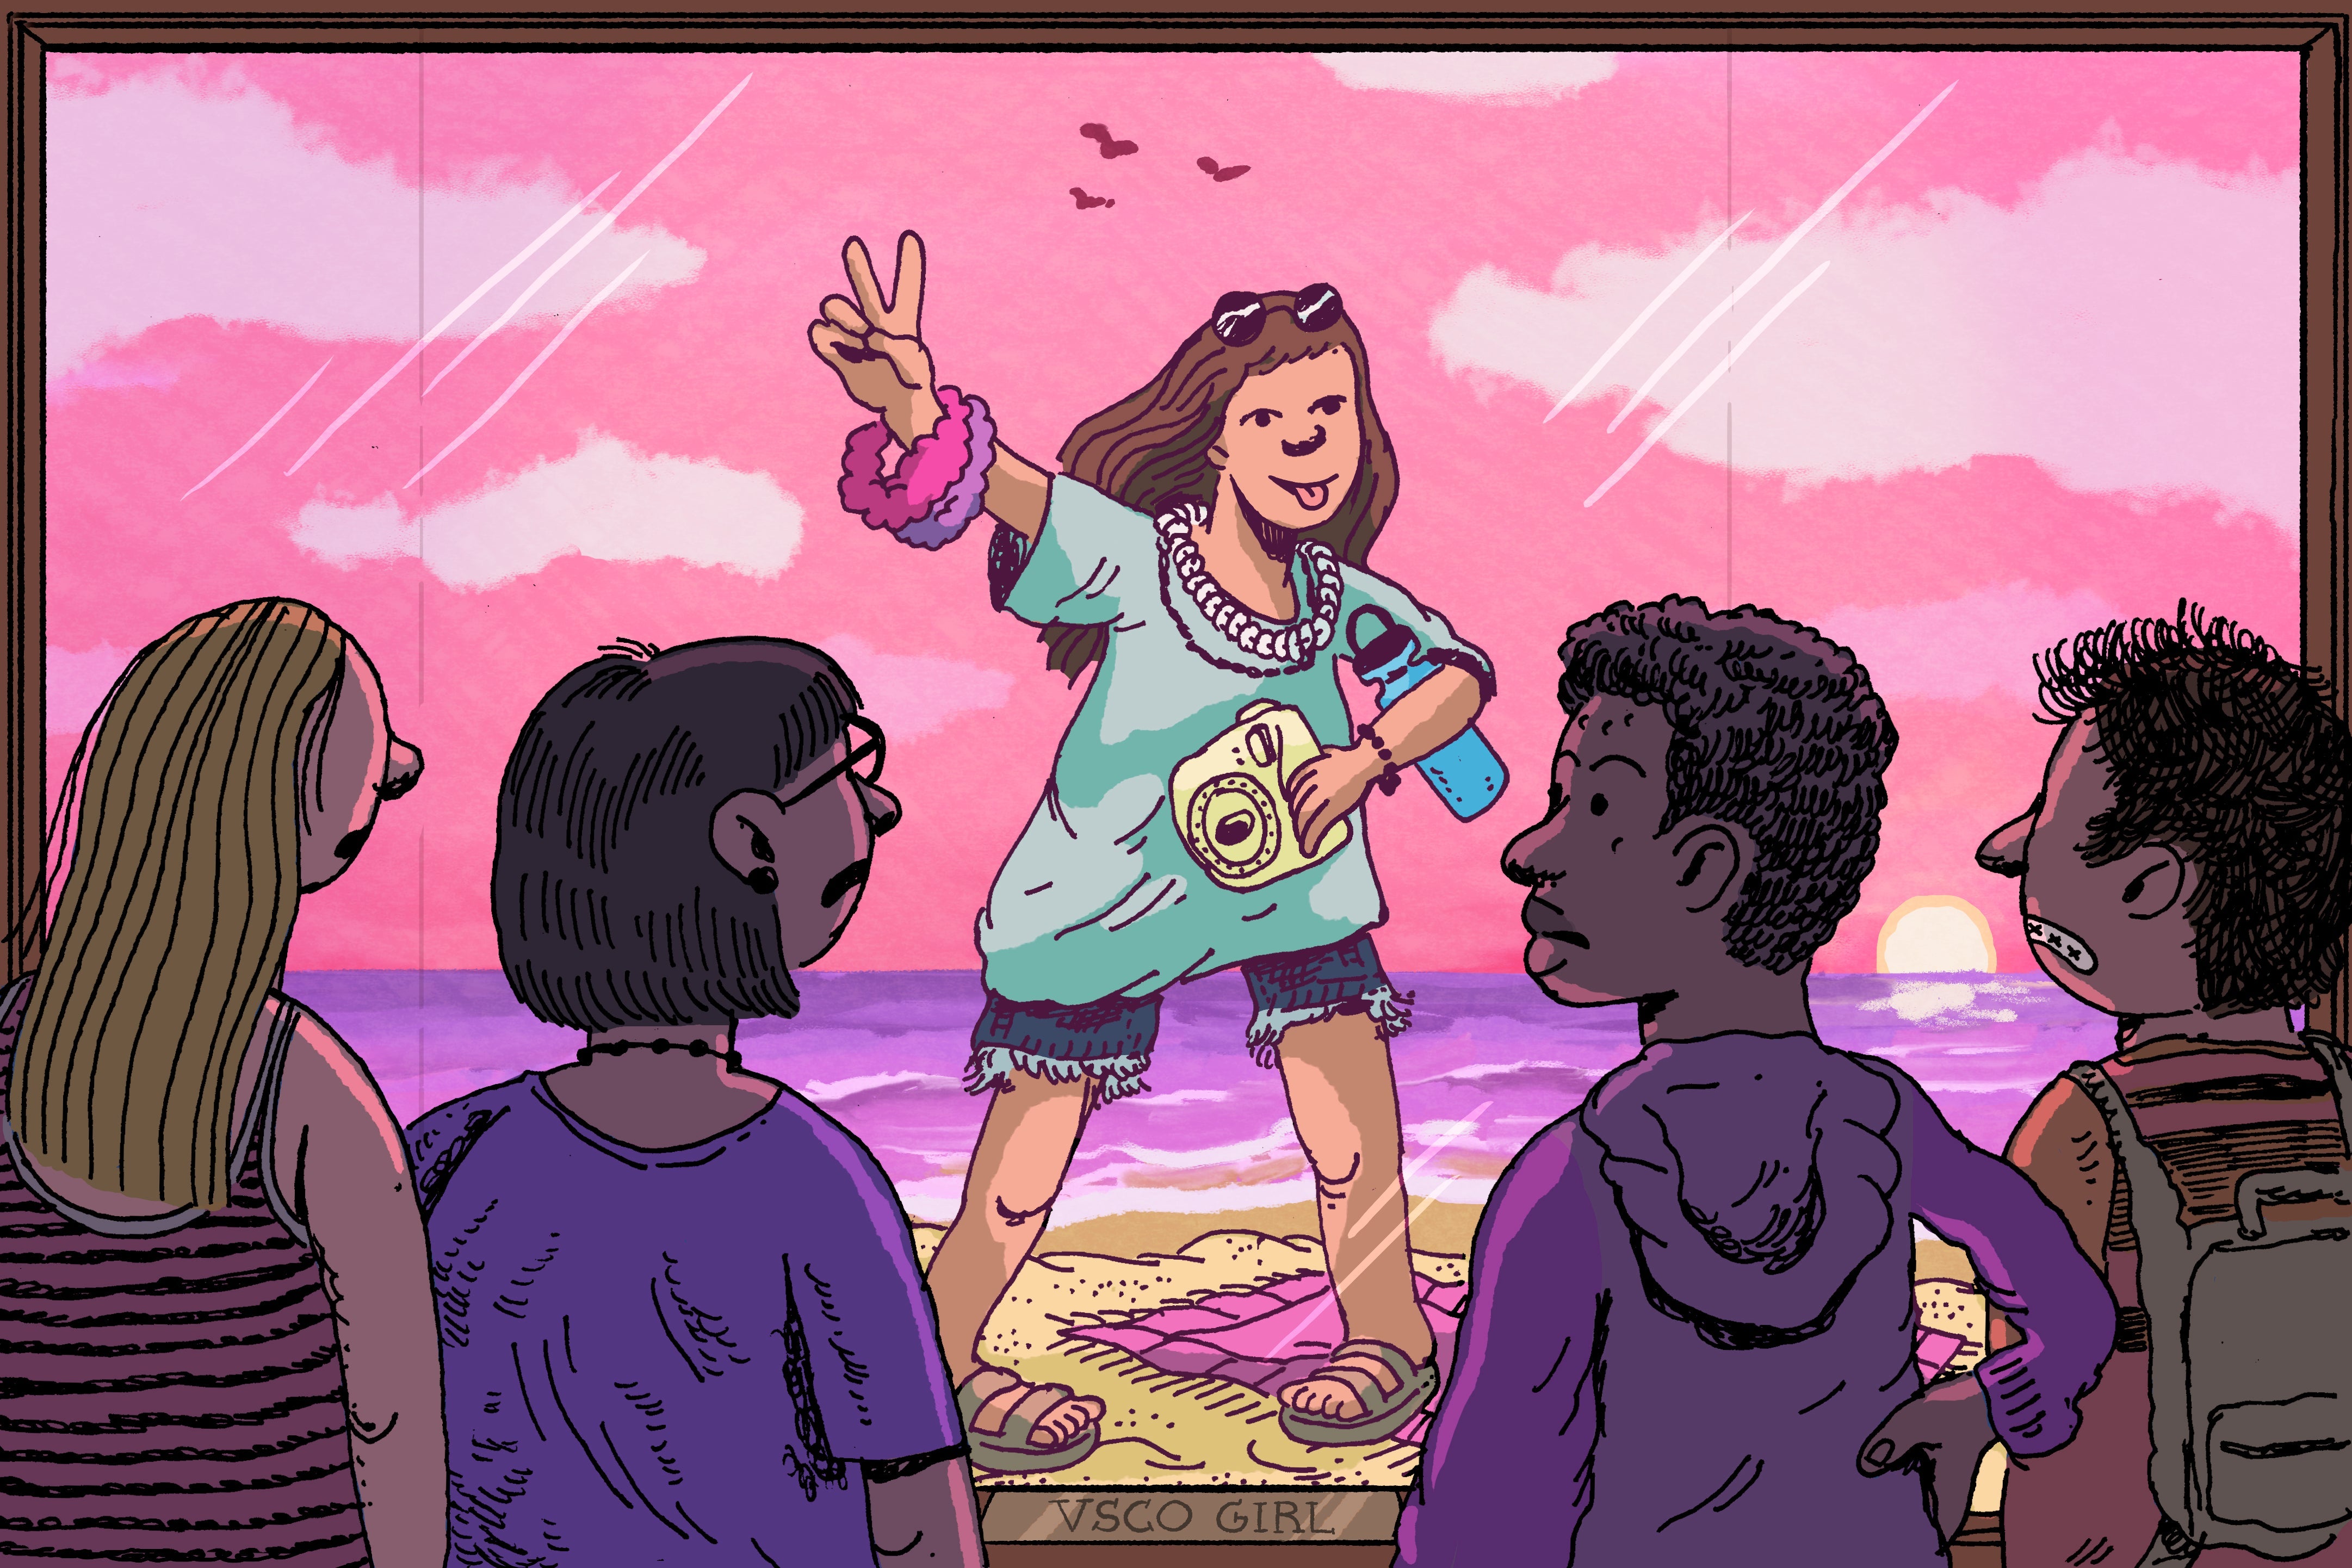 Illustration of a VSCO girl throwing a peace sign gesture while four teens look on with disapproval.